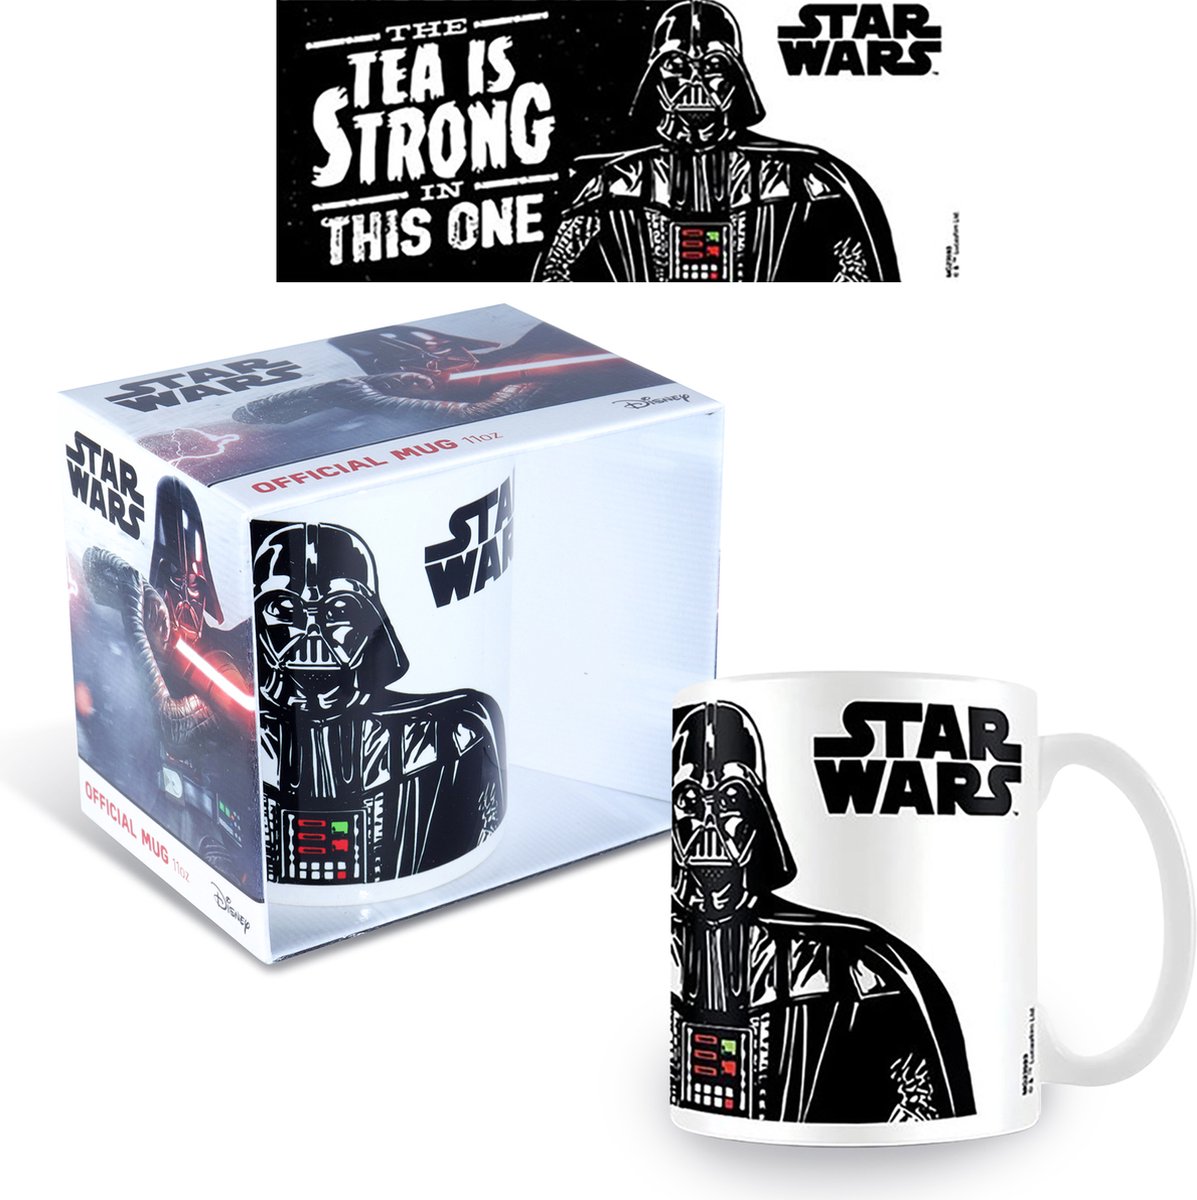 Merchandising STAR WARS - Mug - 300 ml - Tea is Strong in this one